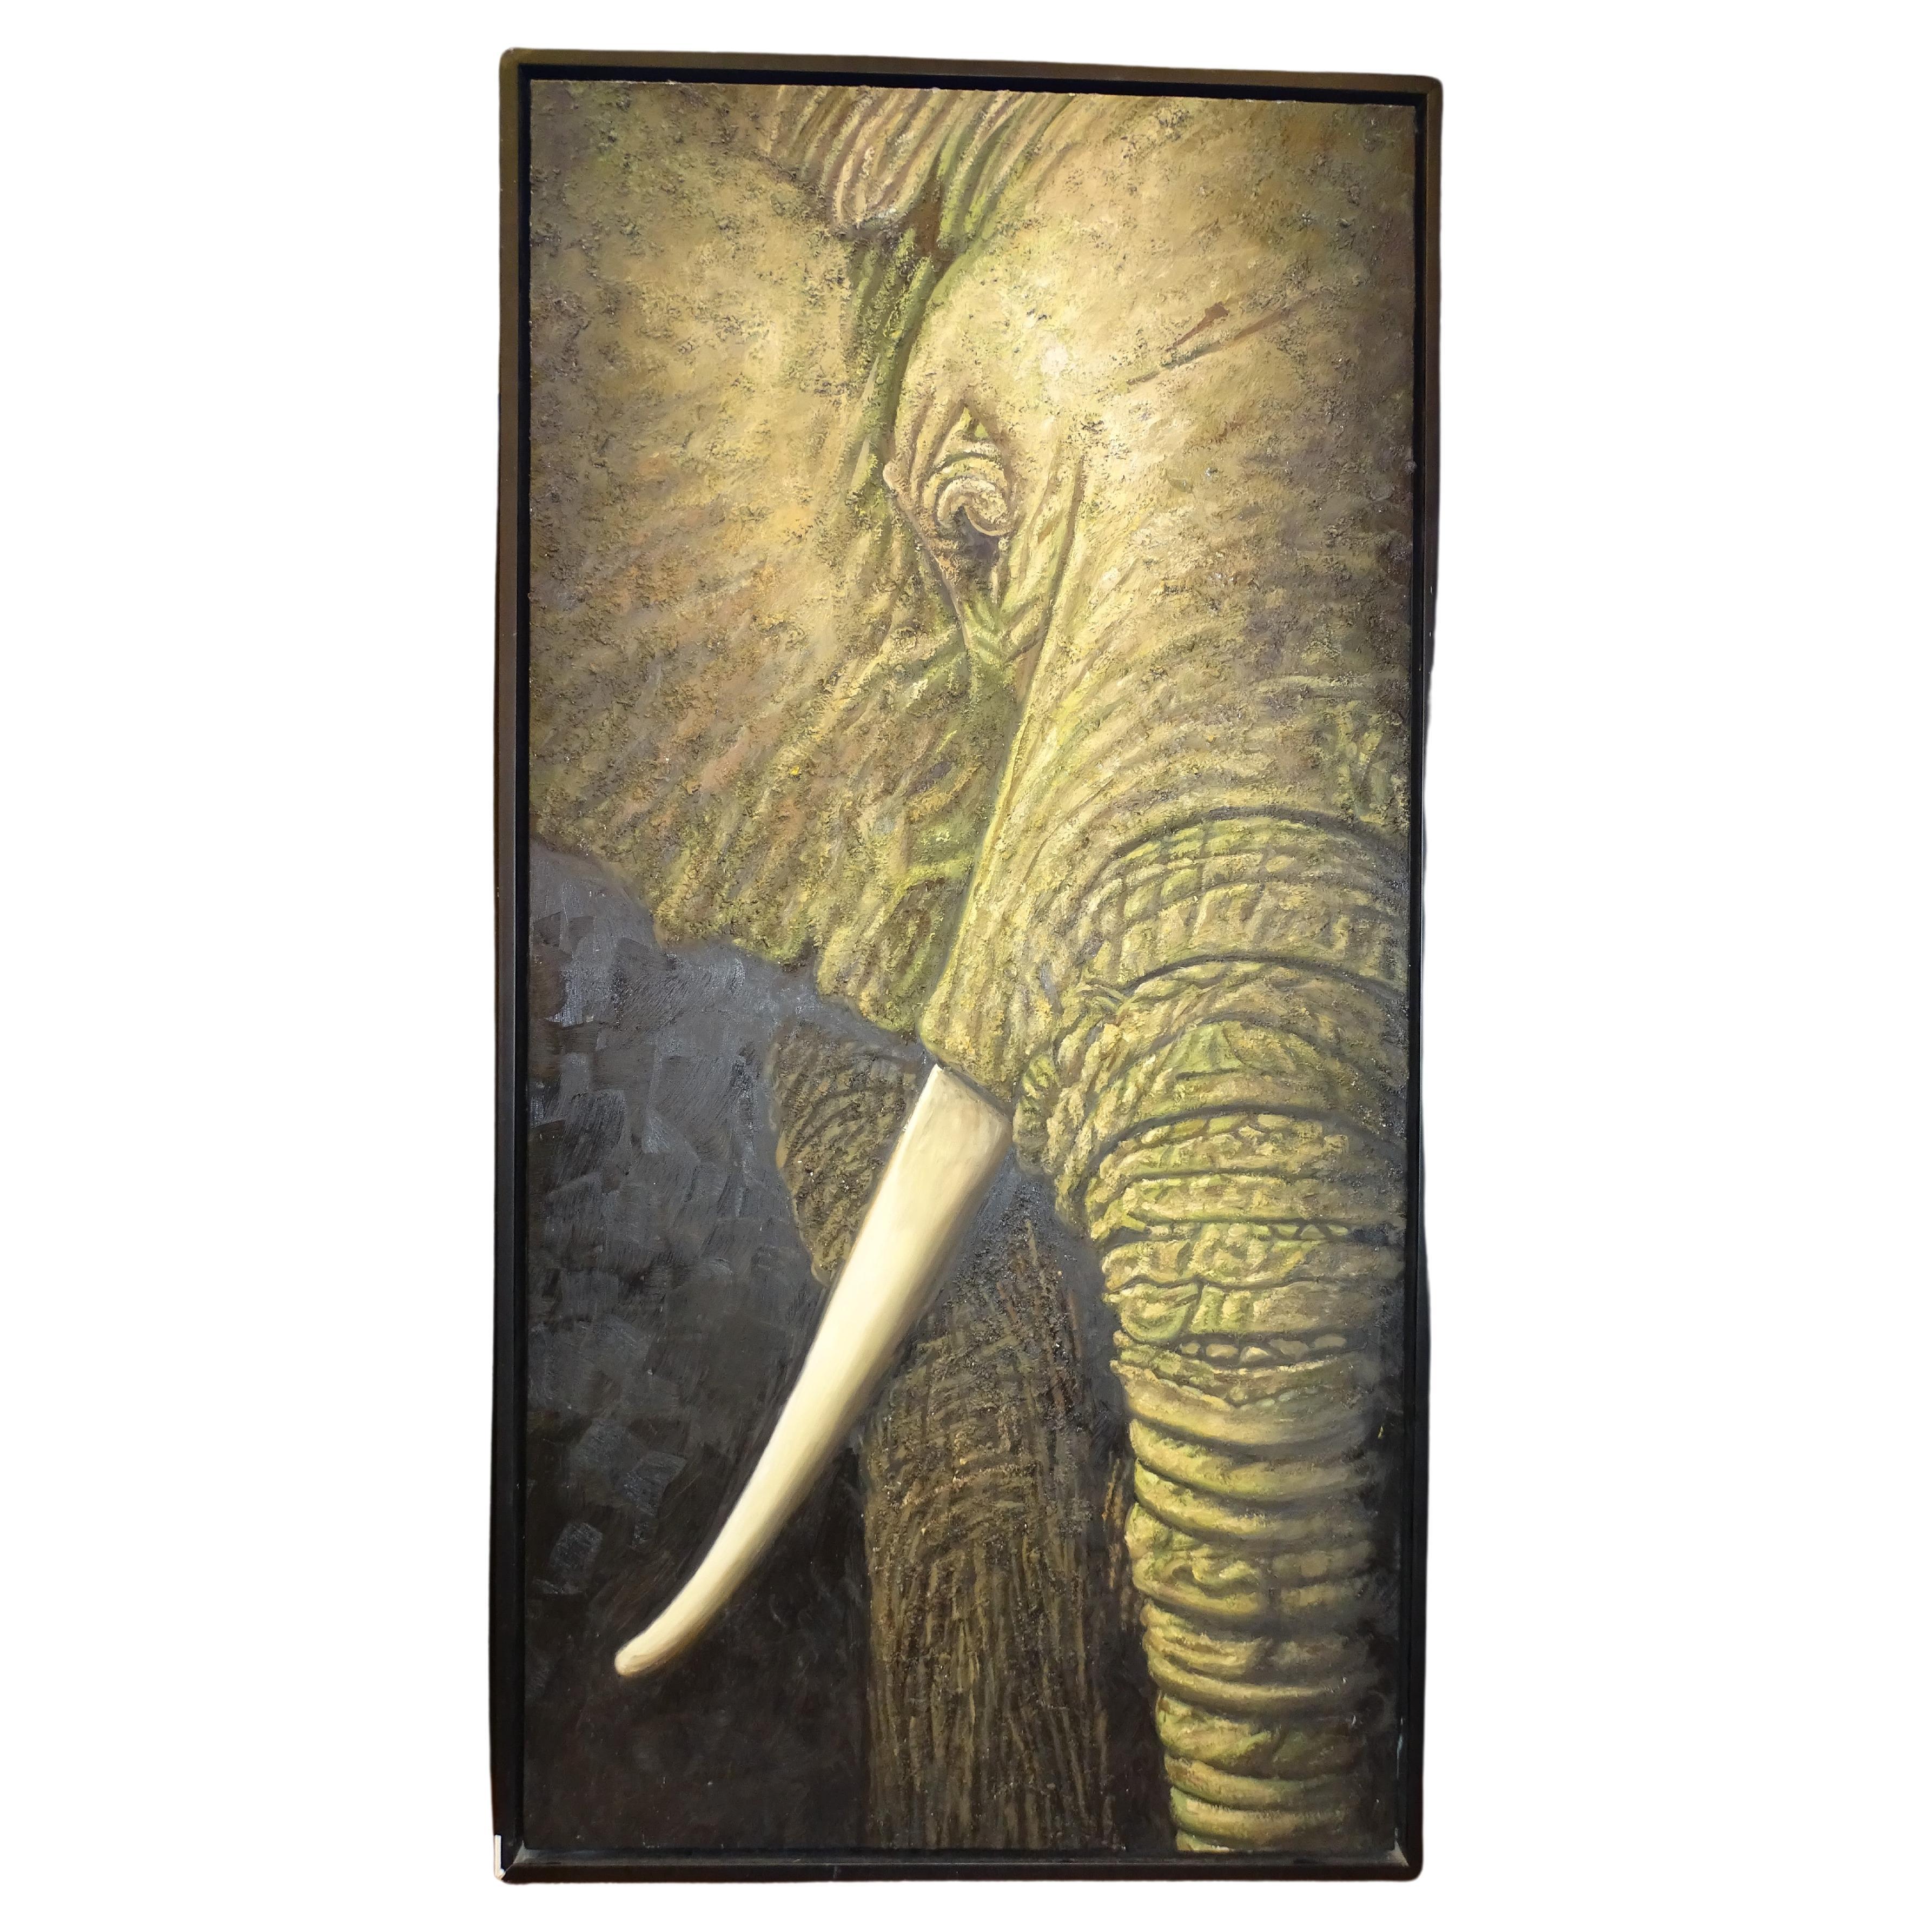 20thcentury French Painting, Oil on Canvas, "The Elephant"